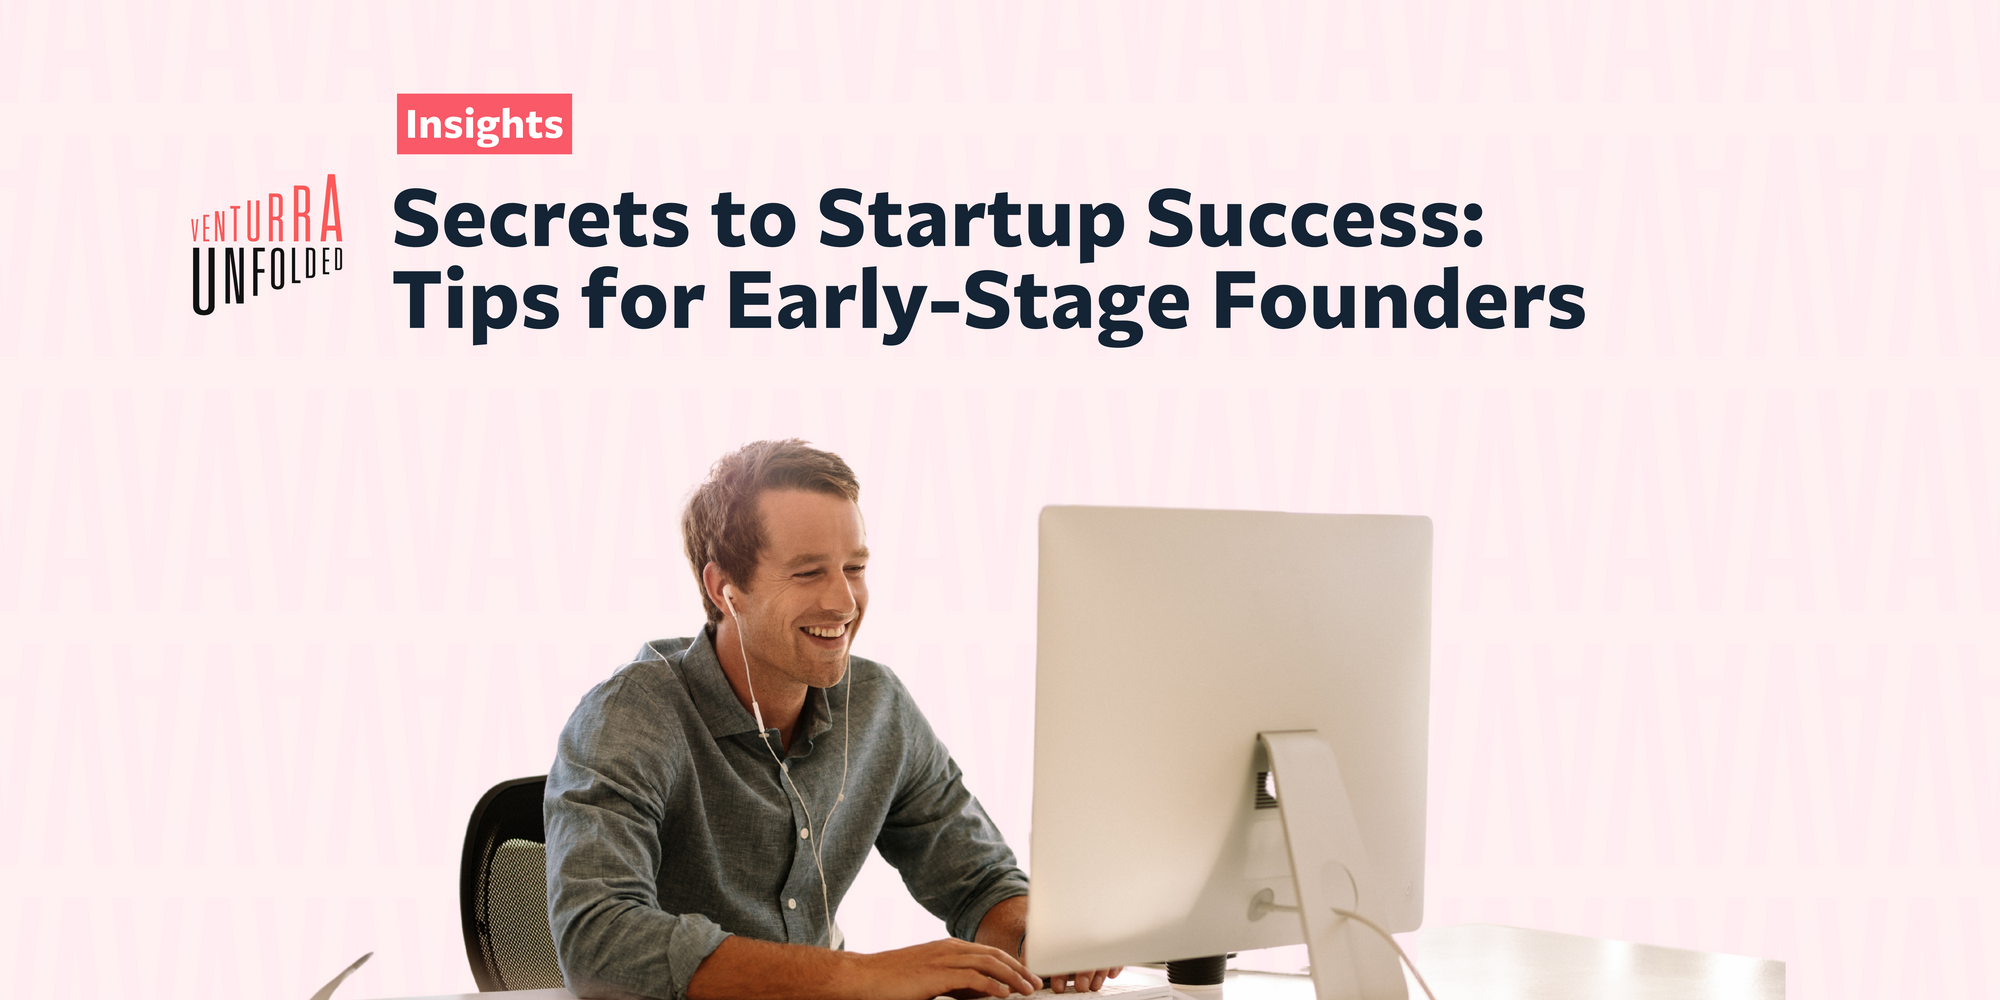 Secrets to Startup Success: 10 Tips for Early-Stage Founders